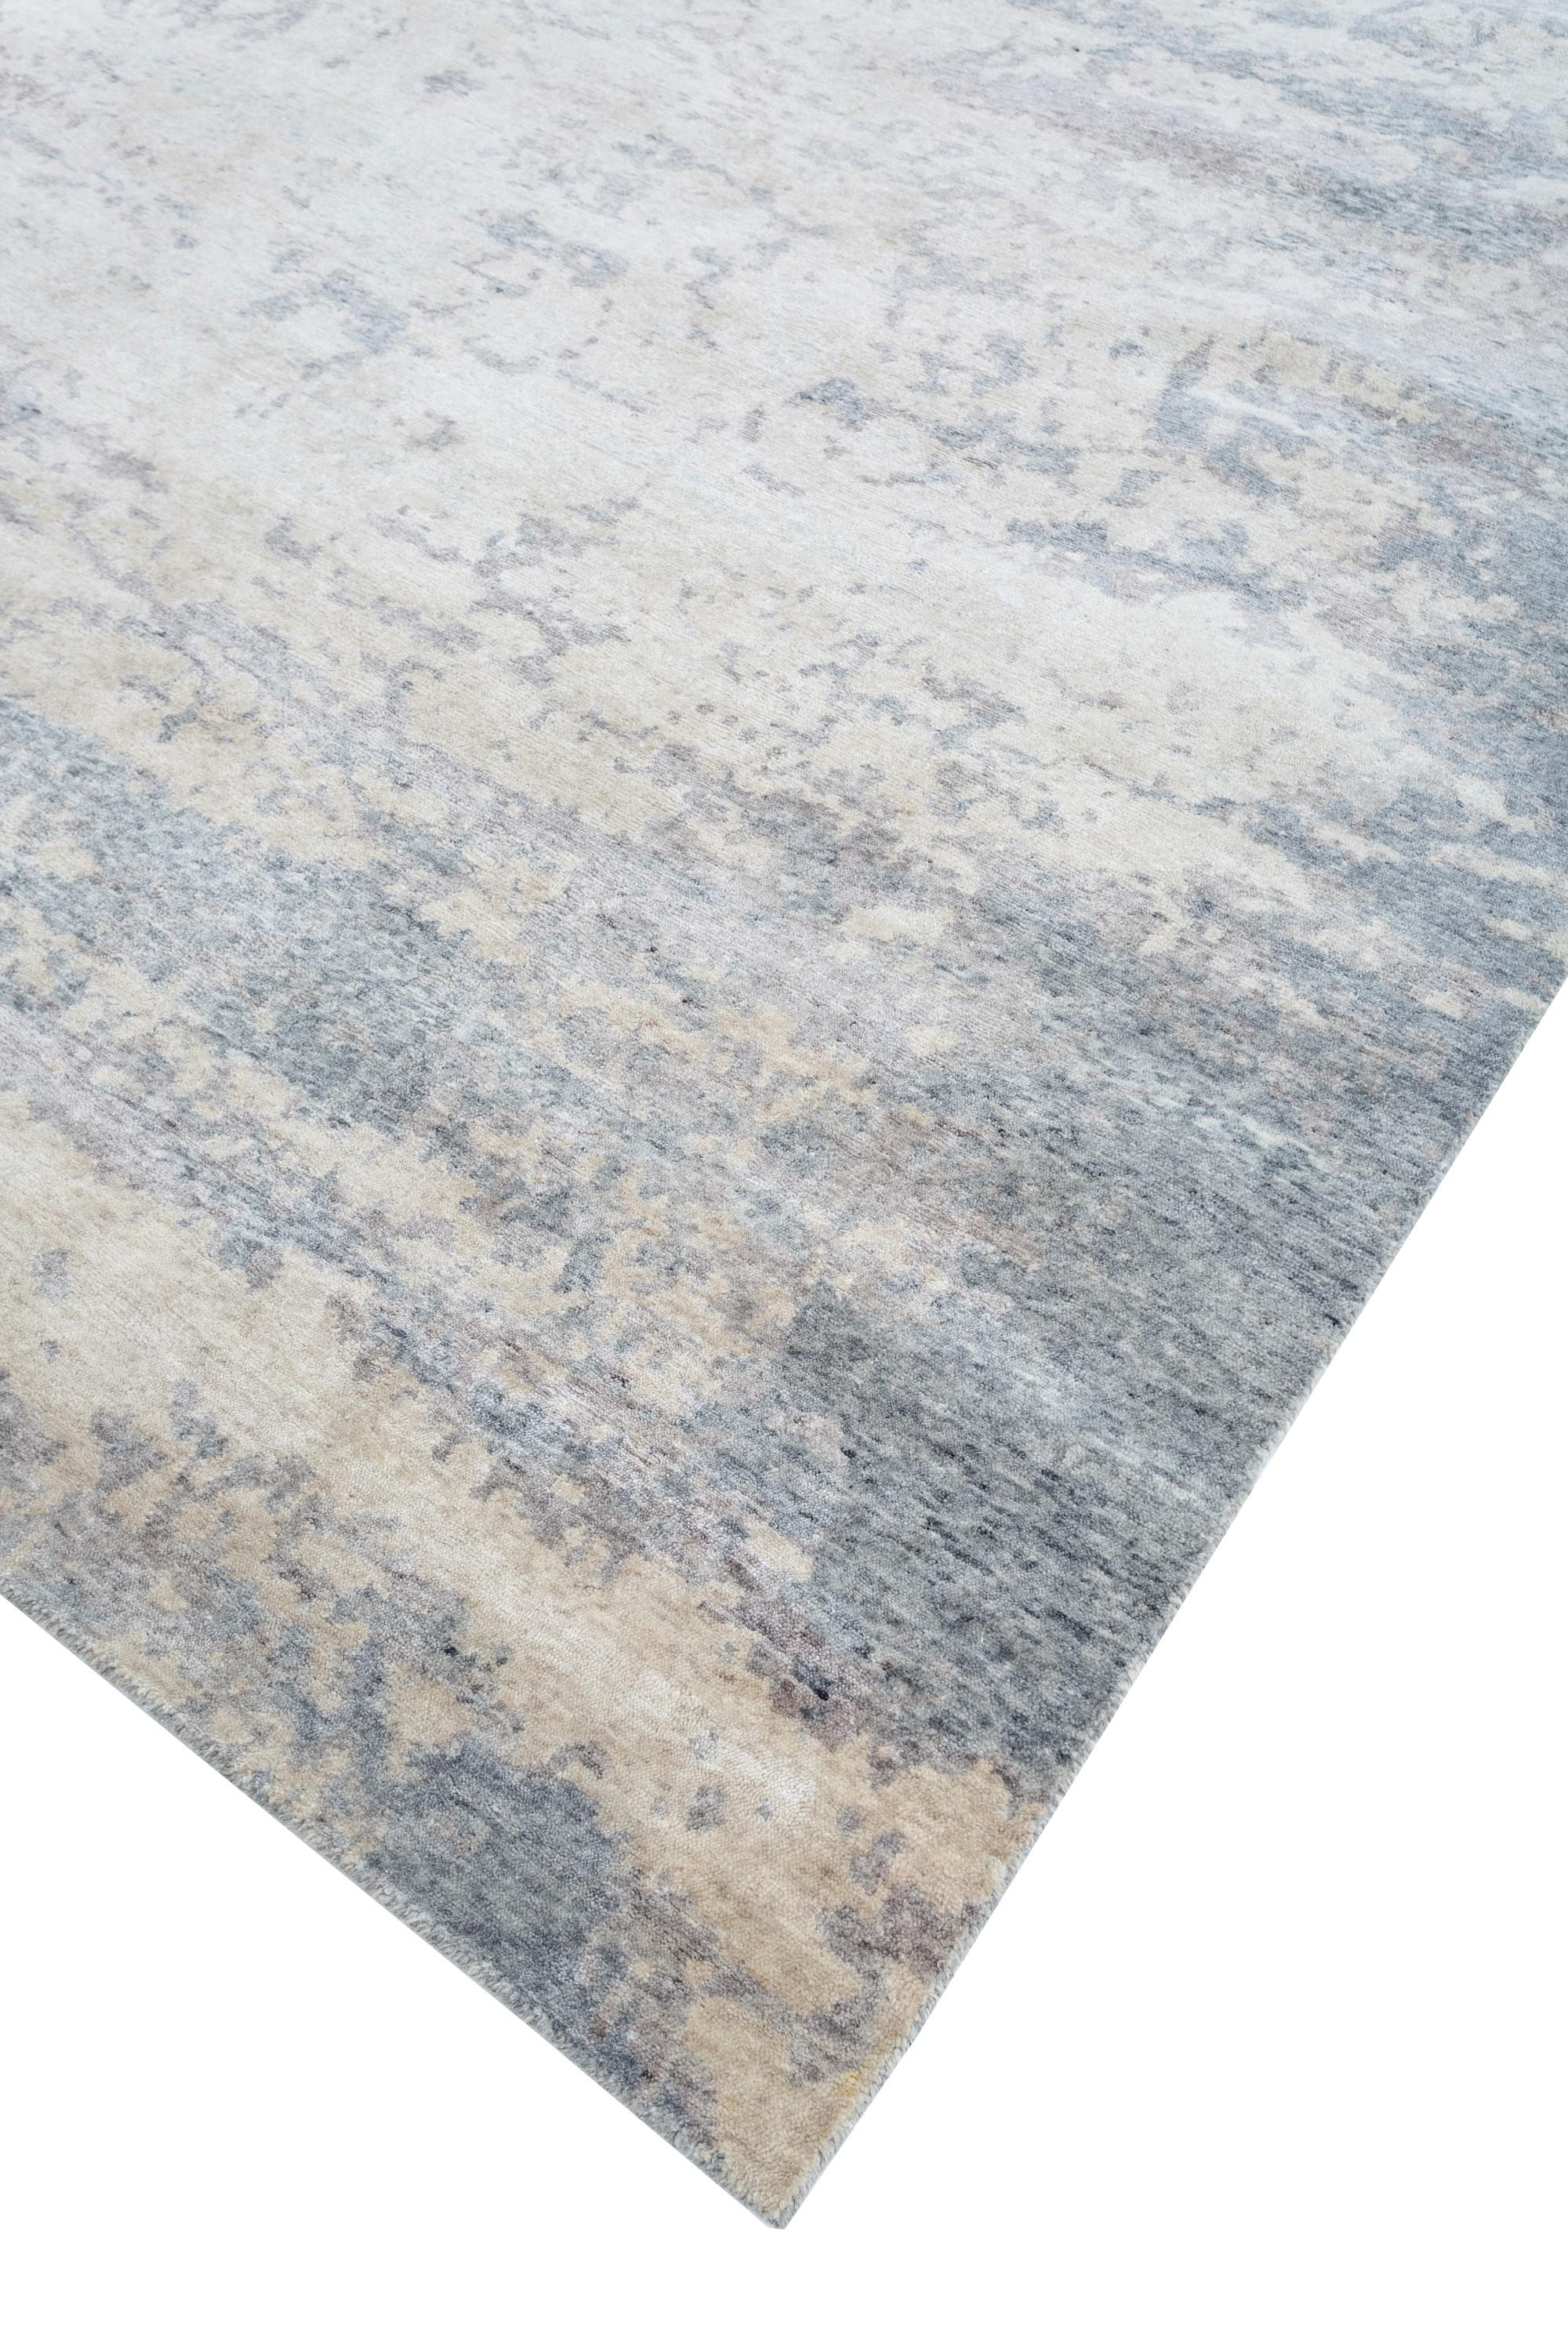 Industrial Timeless Reflections Medium Tan & Silver 240X300 cm Handknotted Rug For Sale